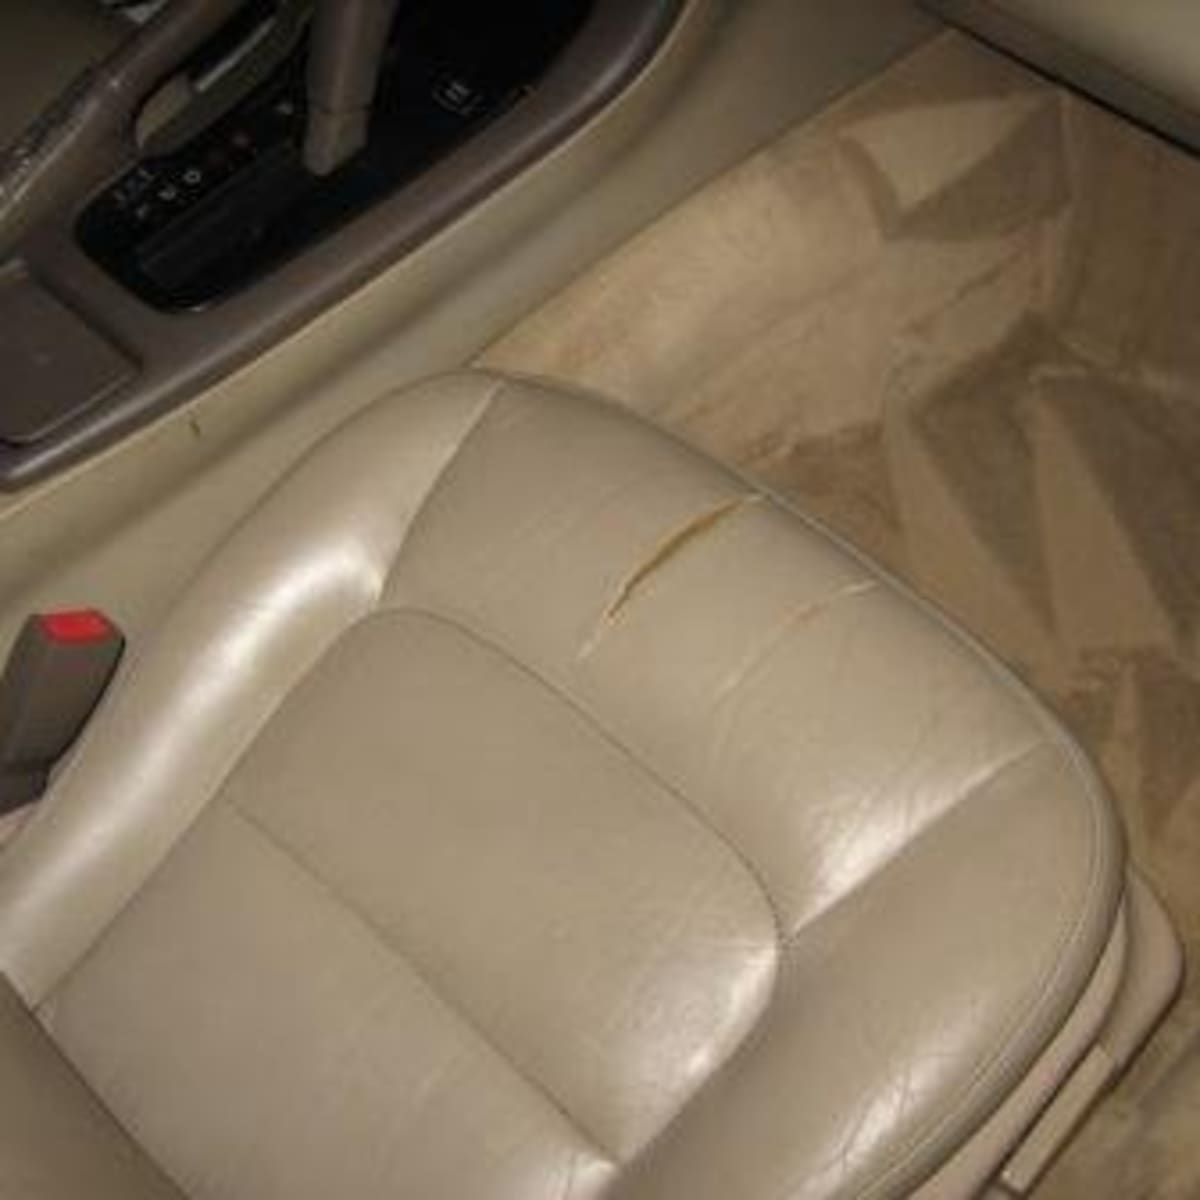 To Repair Leather And Vinyl Car Seats, How Much To Fix Tear In Leather Car Seat